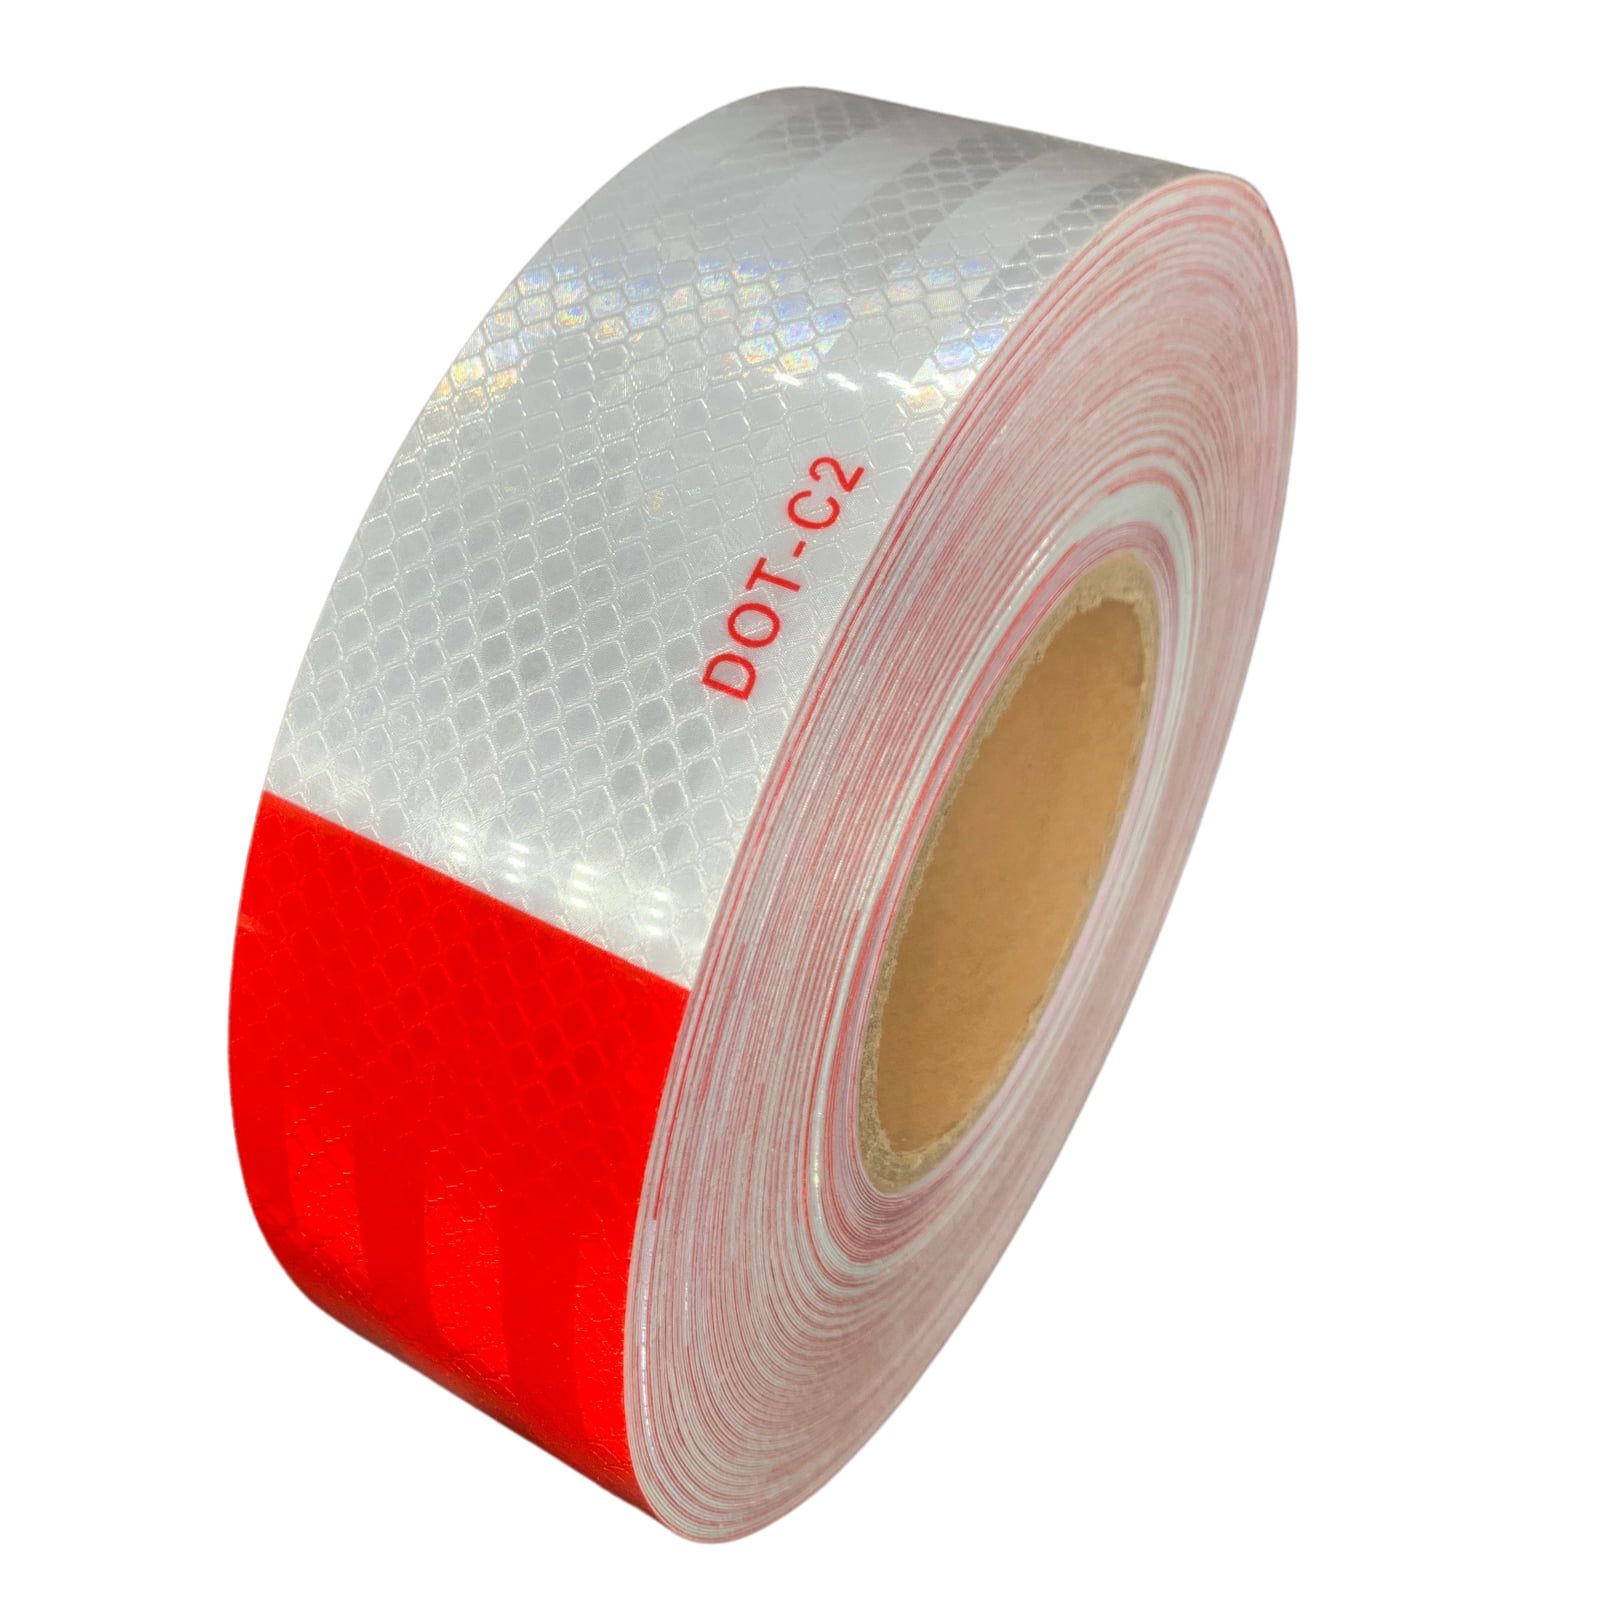 Reflective tape for trailers Fluorescent yellow safety tape DOT-C2 tape 1inX25ft 